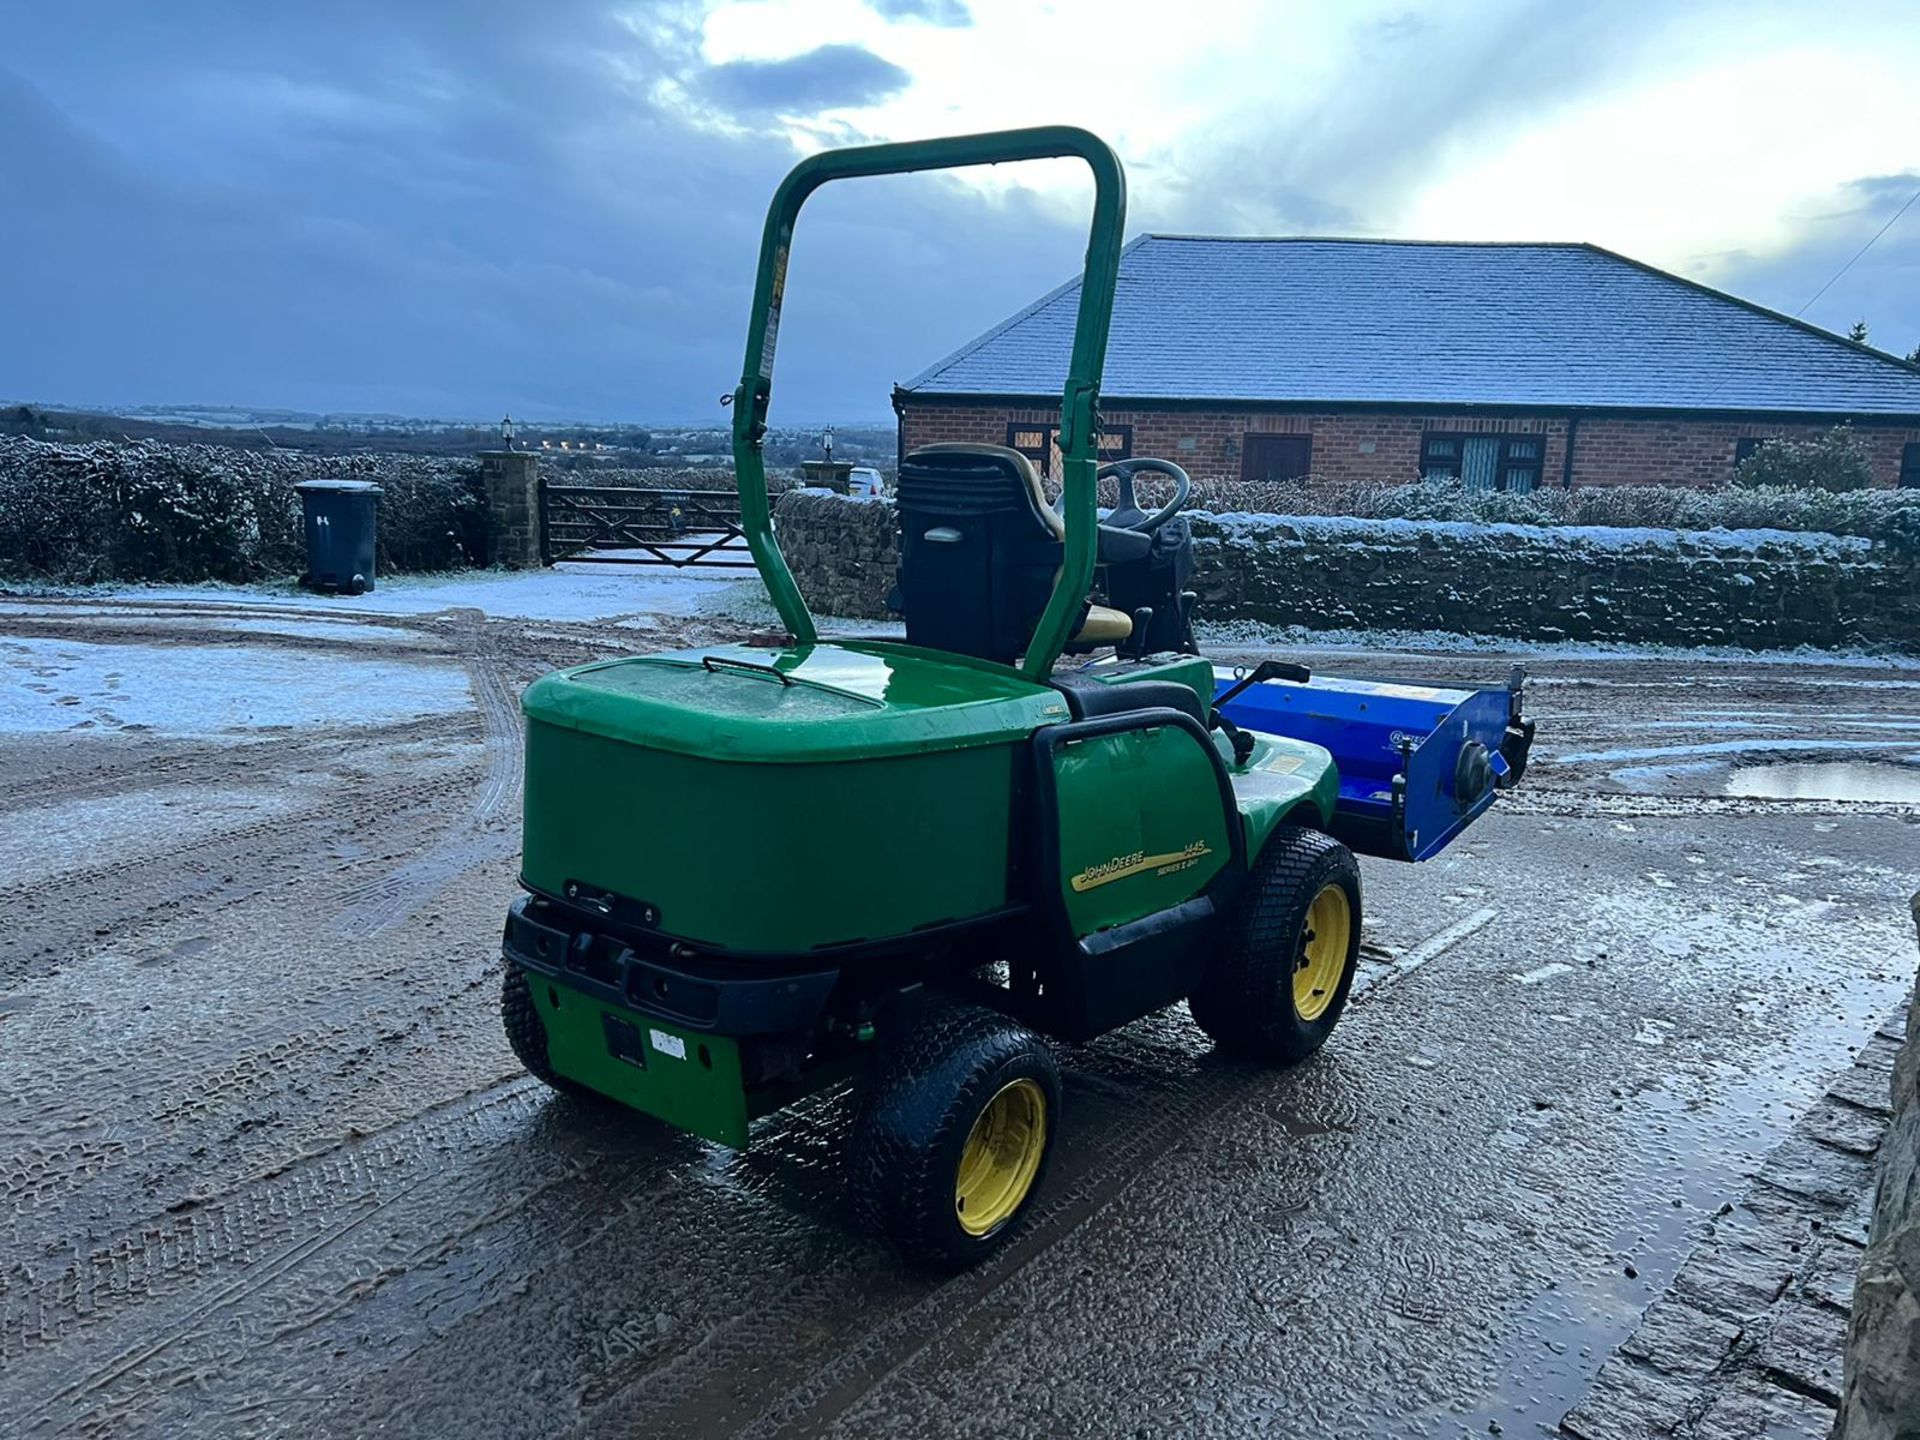 JOHN DEERE 1445 4WD RIDE ON MOWER WITH RYETEC 1200 FLAIL DECK, SHOWING A LOW 3892 HOURS *PLUS VAT* - Image 5 of 11